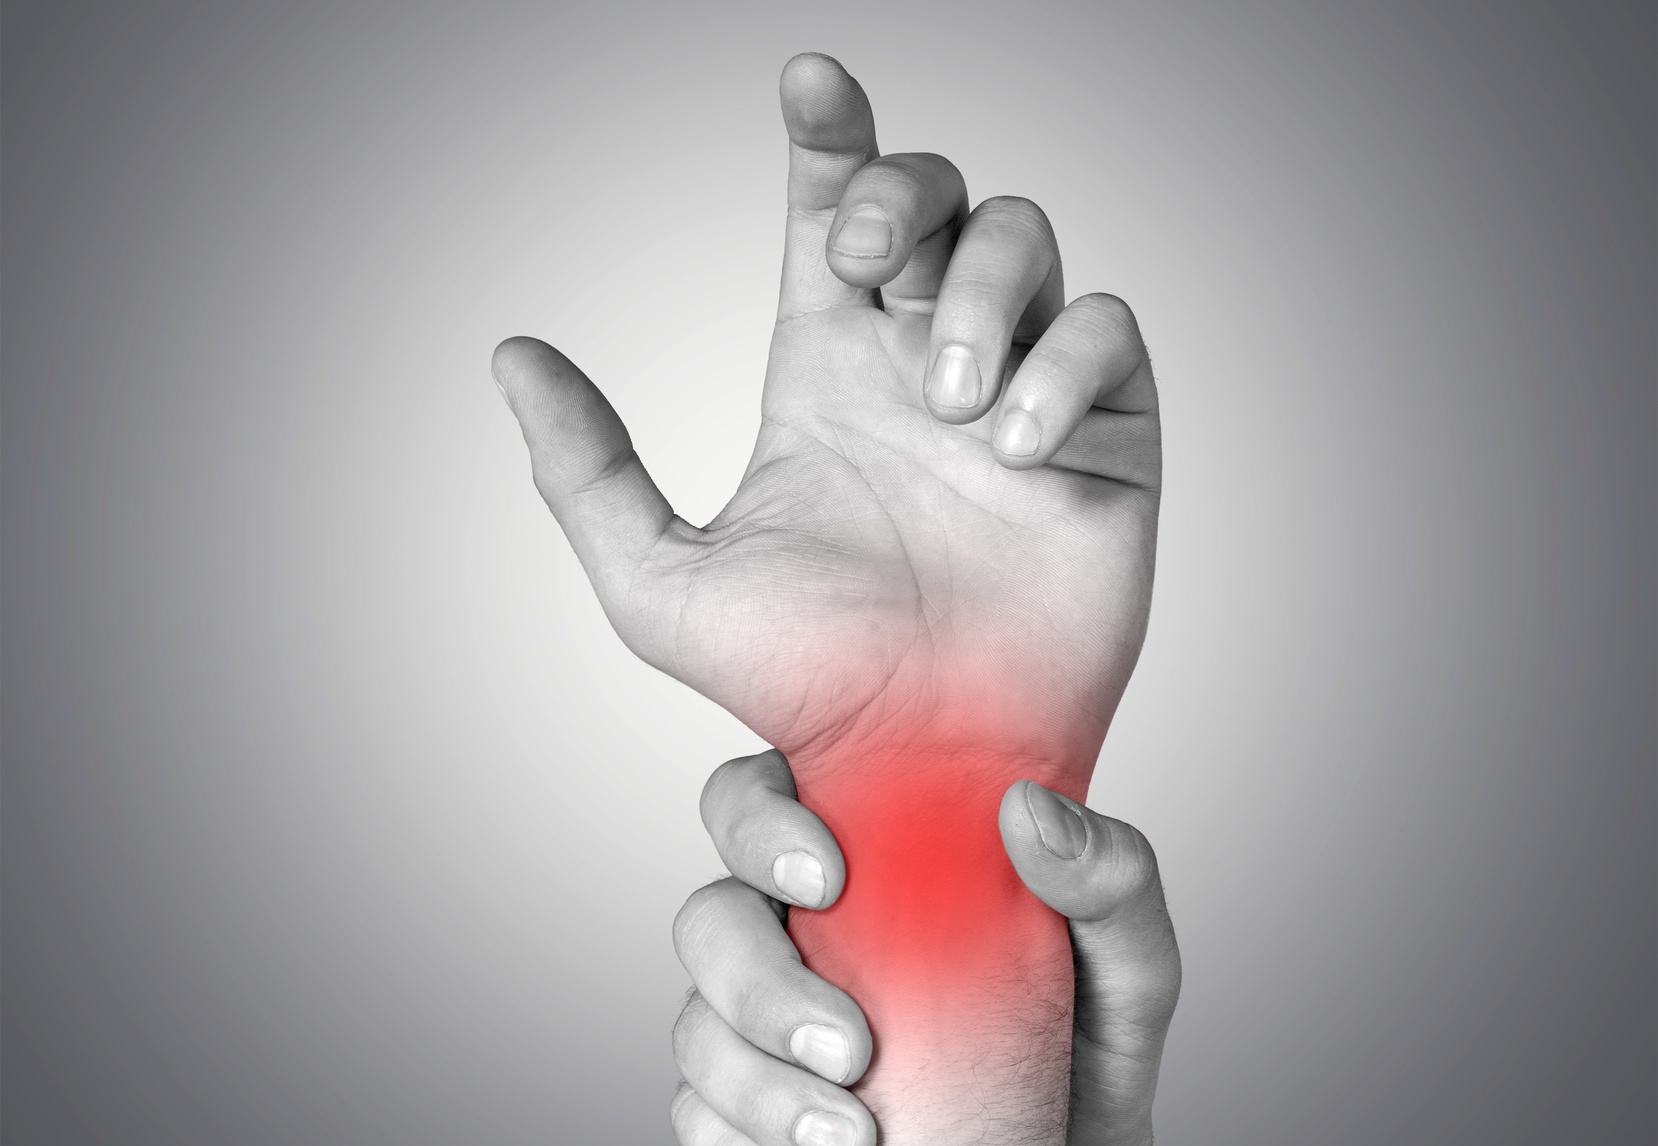 Wrist Pain? Hand Injury? Carpal Tunnel Syndrome? Your Top Pain Management Orthopedic / Geriatric / Sport Rehabilitation Therapists (PT) are here to help you! 